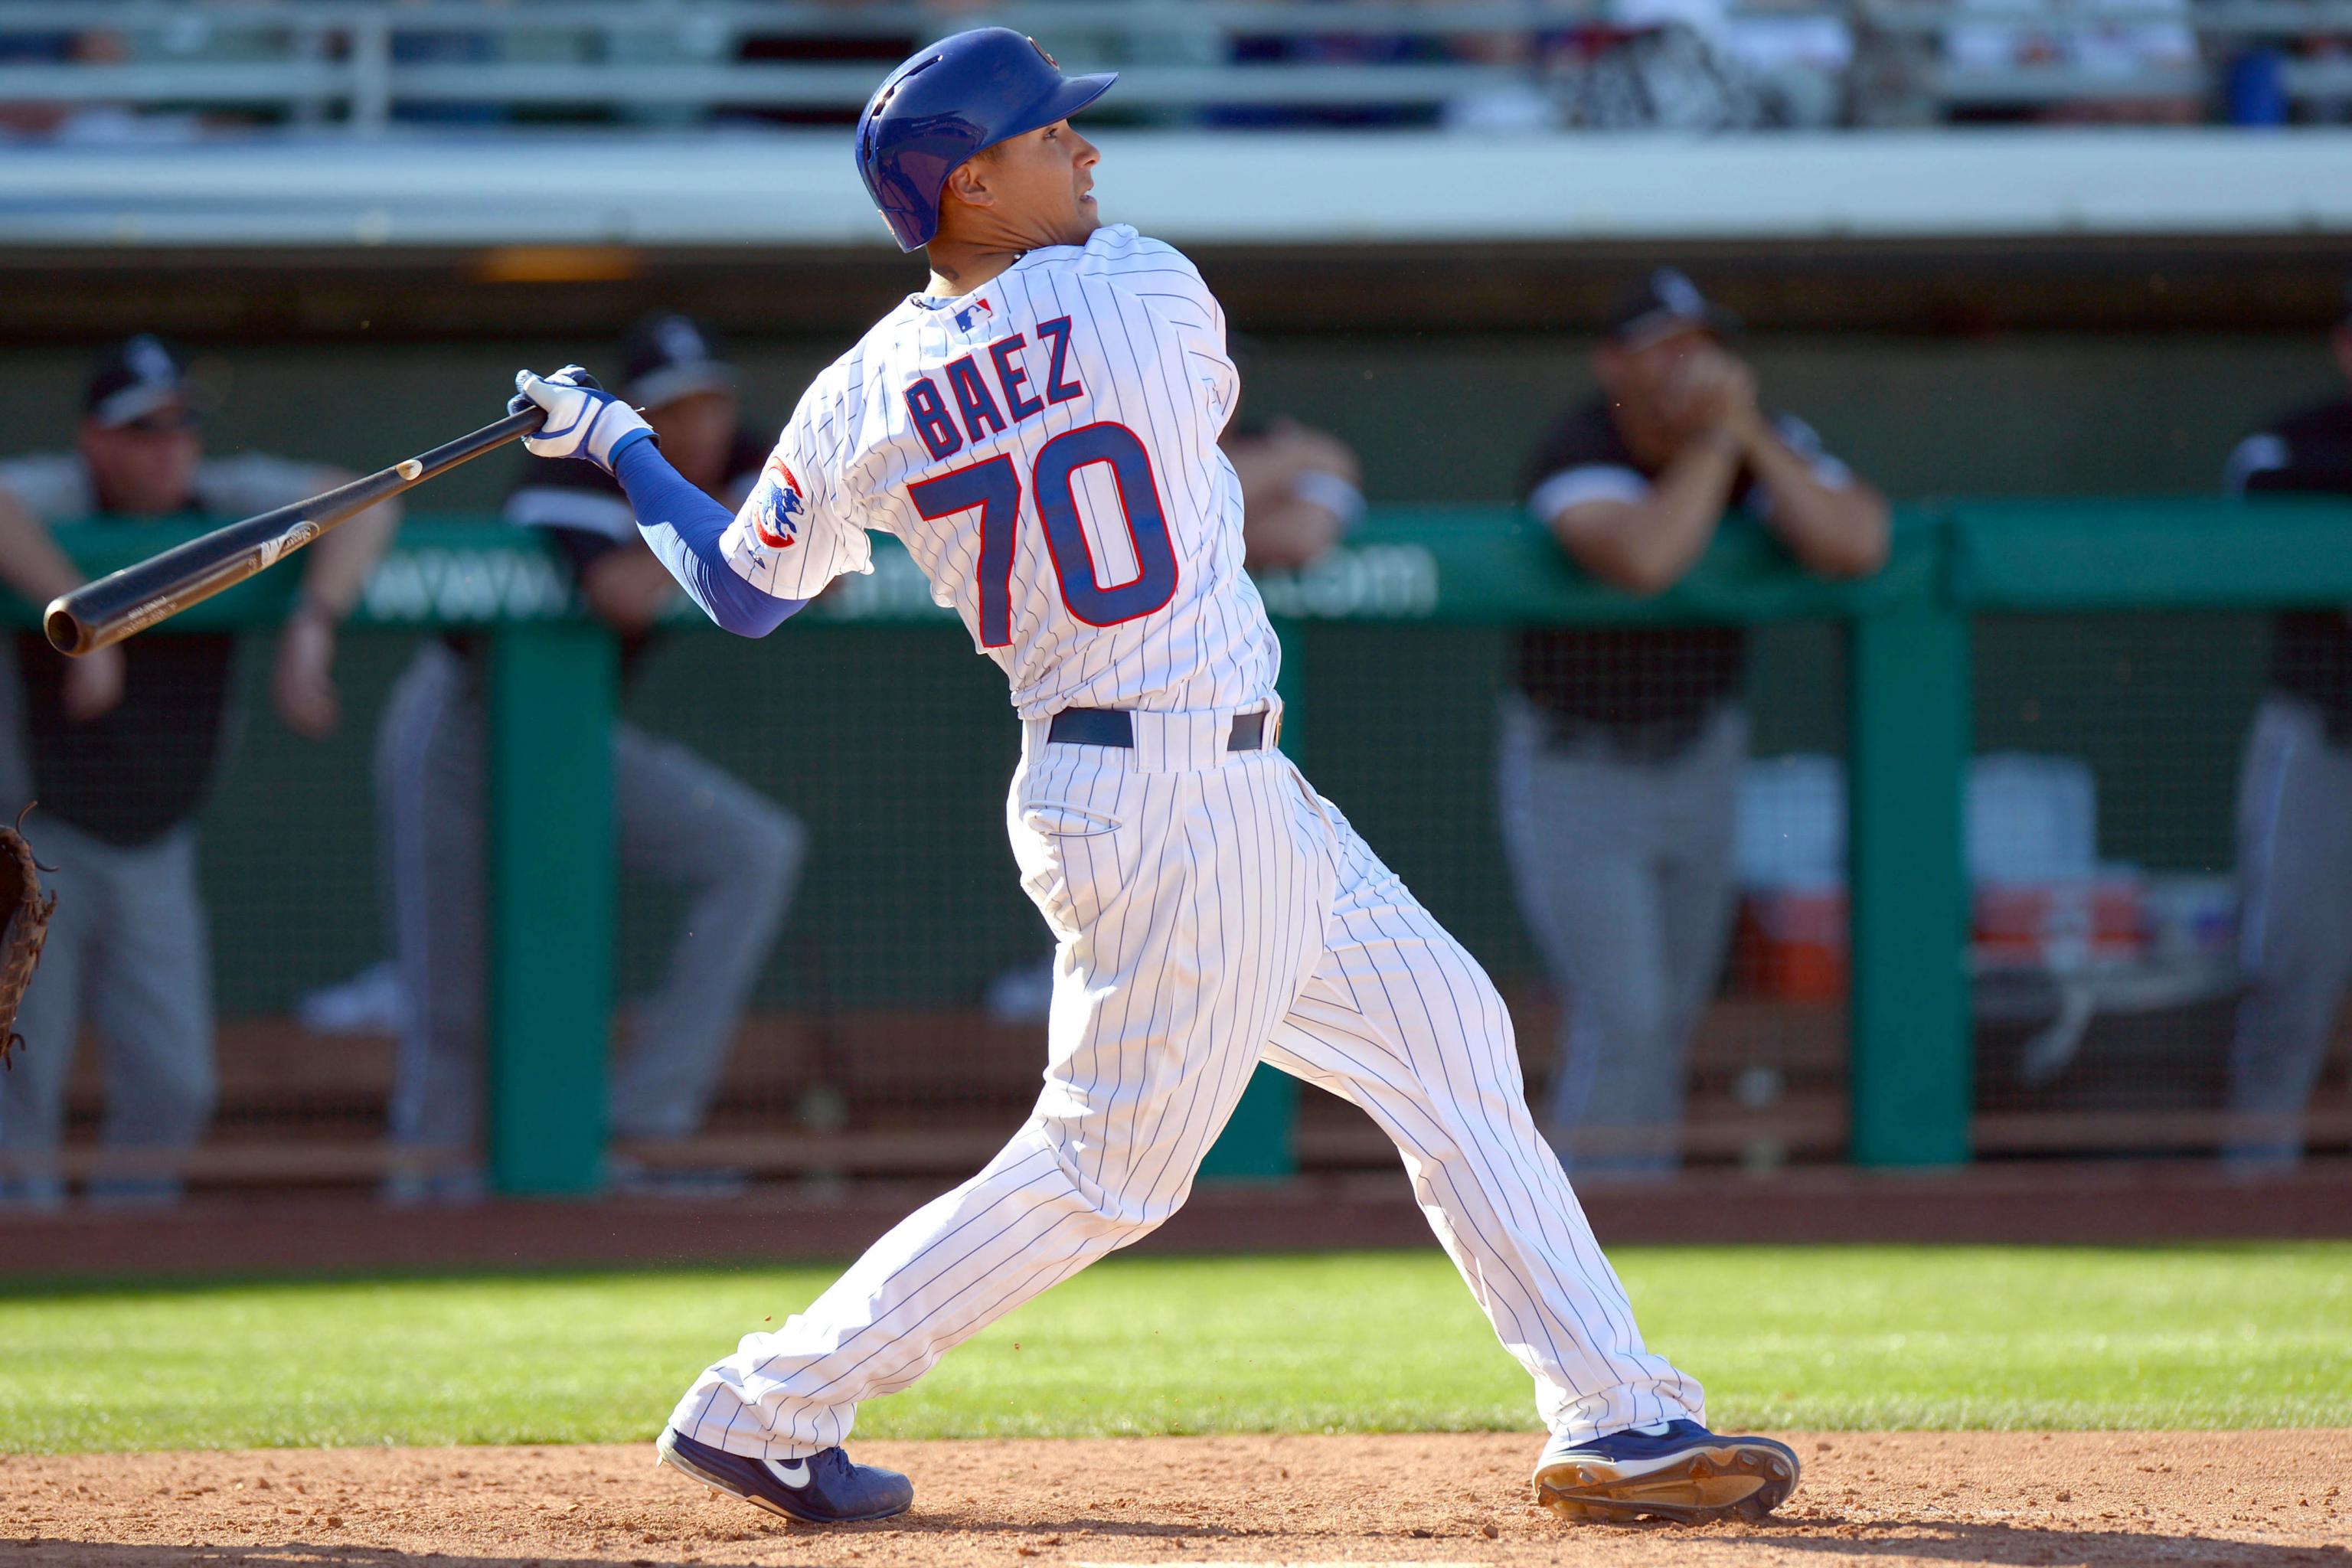 Watch Javier Baez's new MLB ad: 'Call me what you want. I just wanna play.